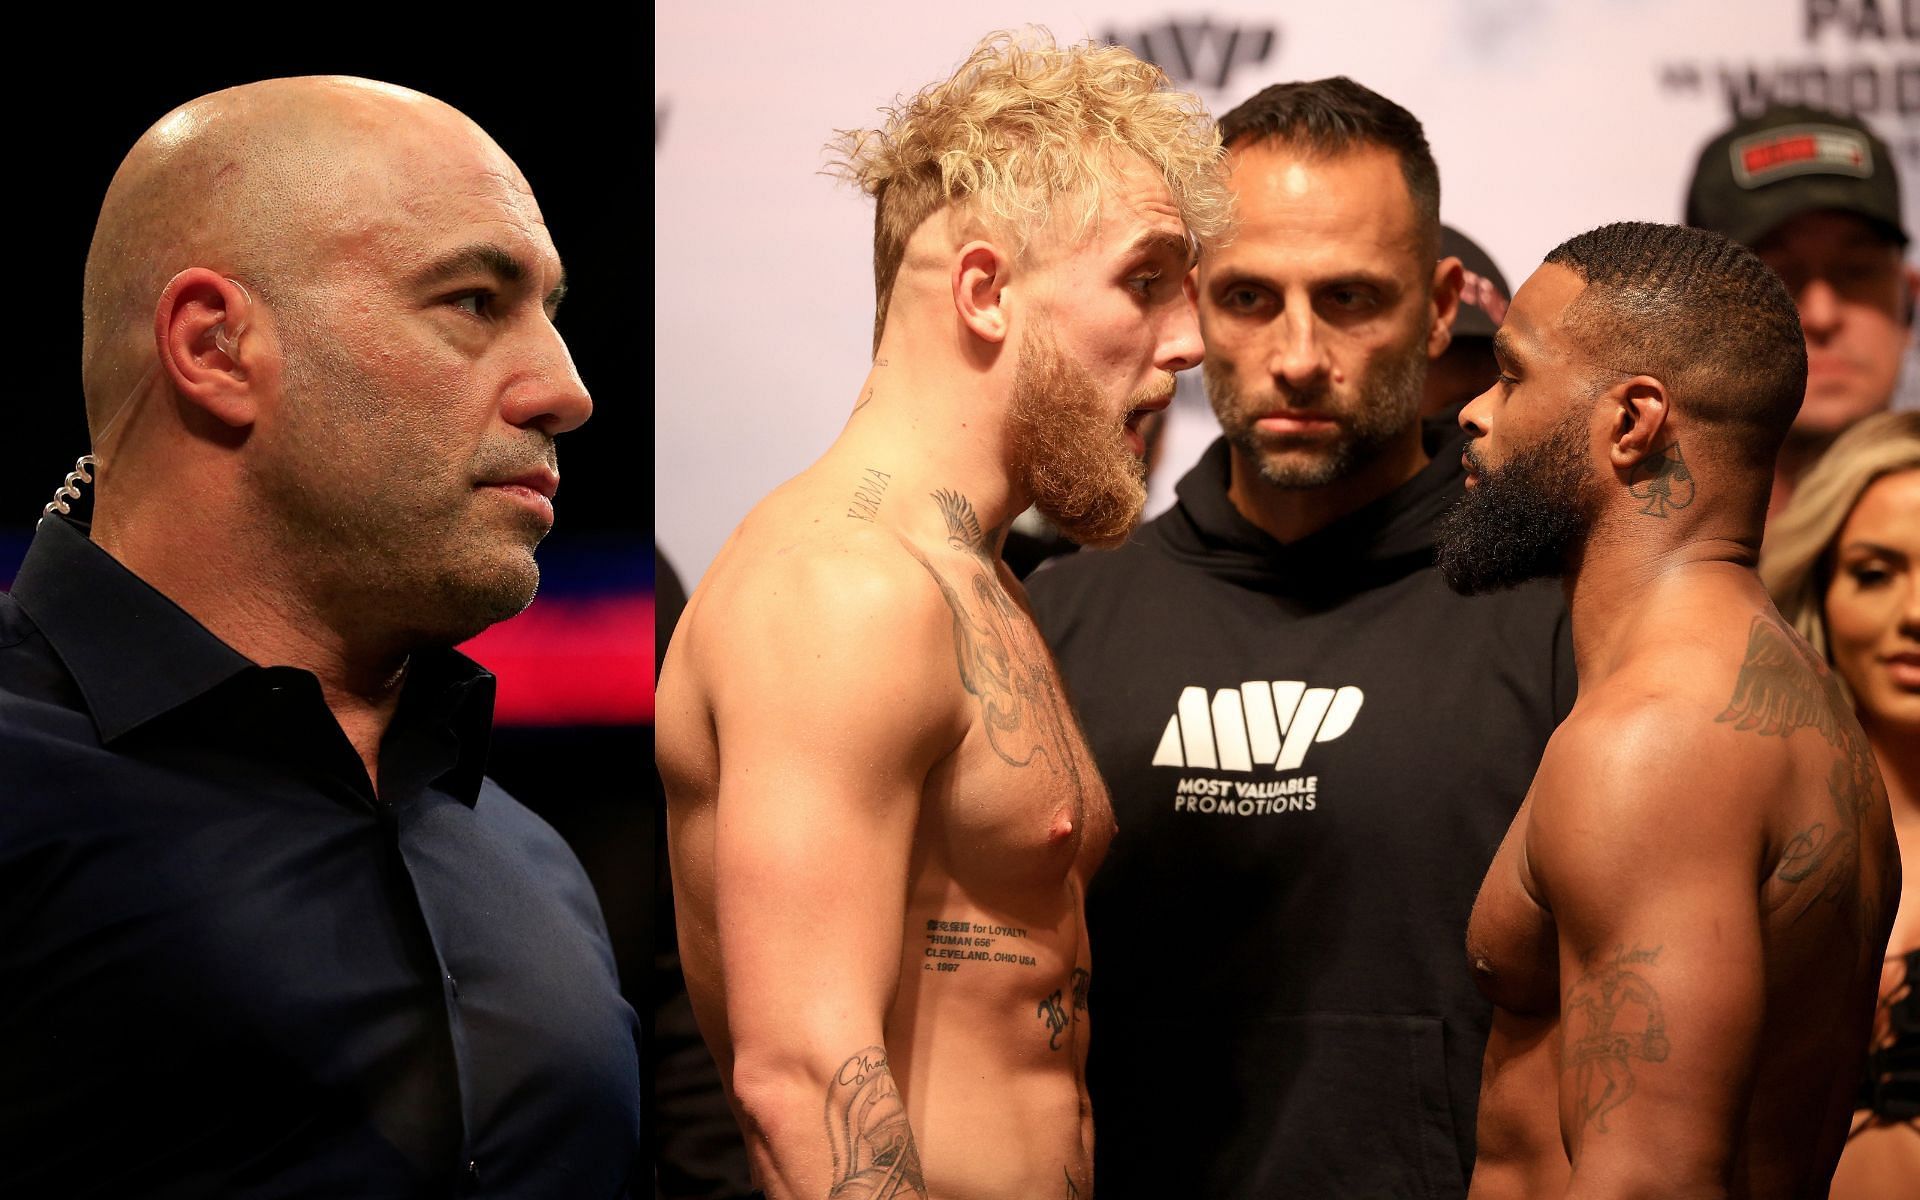 Joe Rogan (left) and the official face off ahead of Jake Paul vs. Tyron Woodley 2 (right)